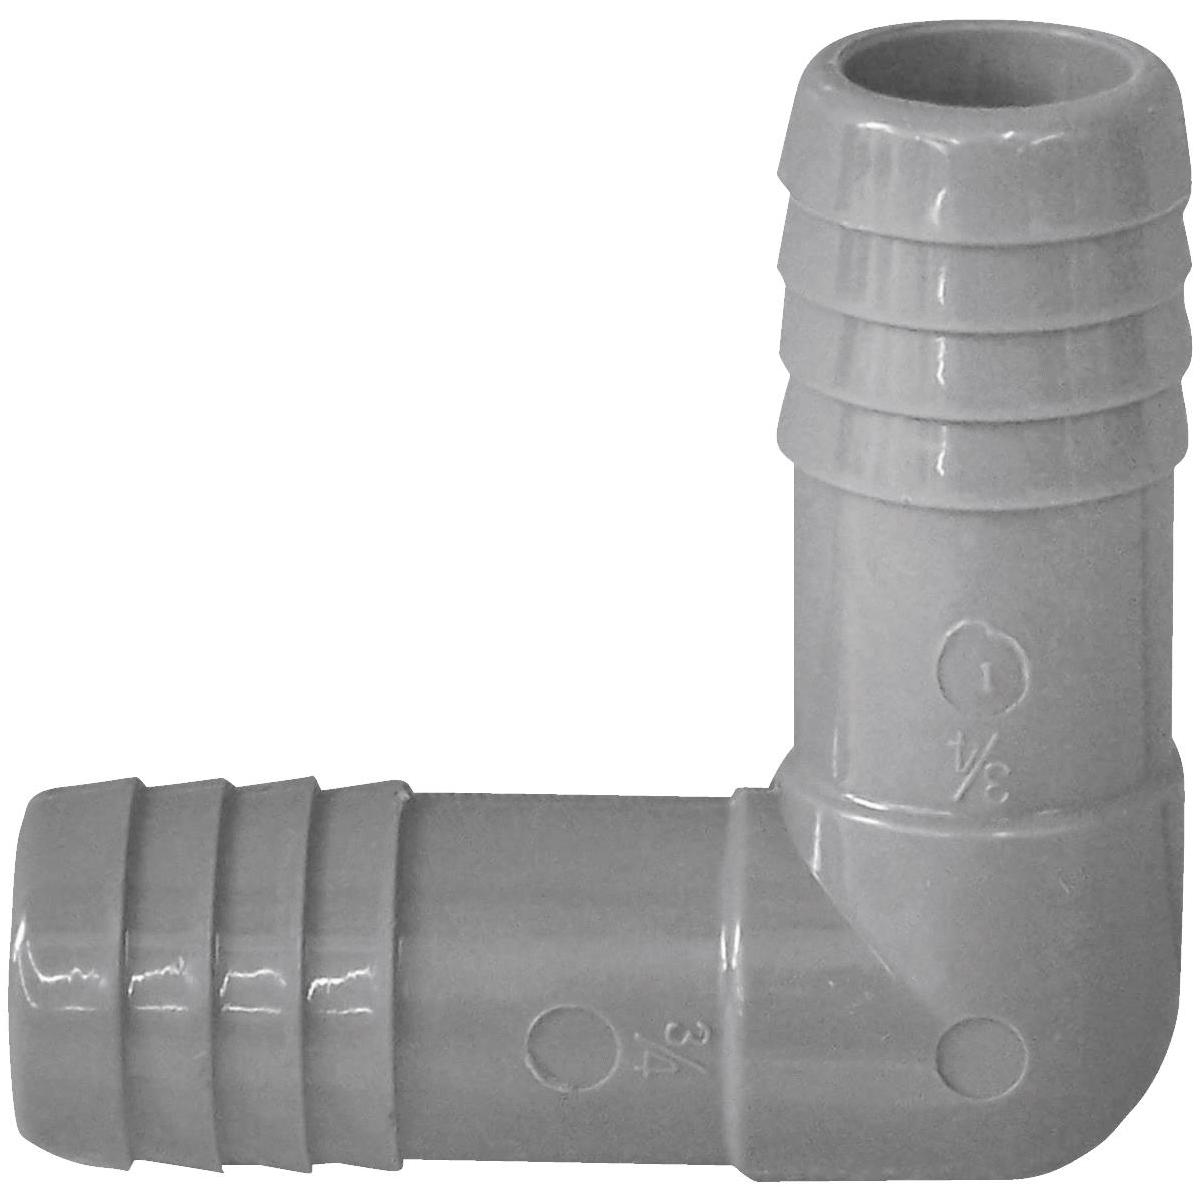 Genova Products 350110 1 Poly Insert Coupling